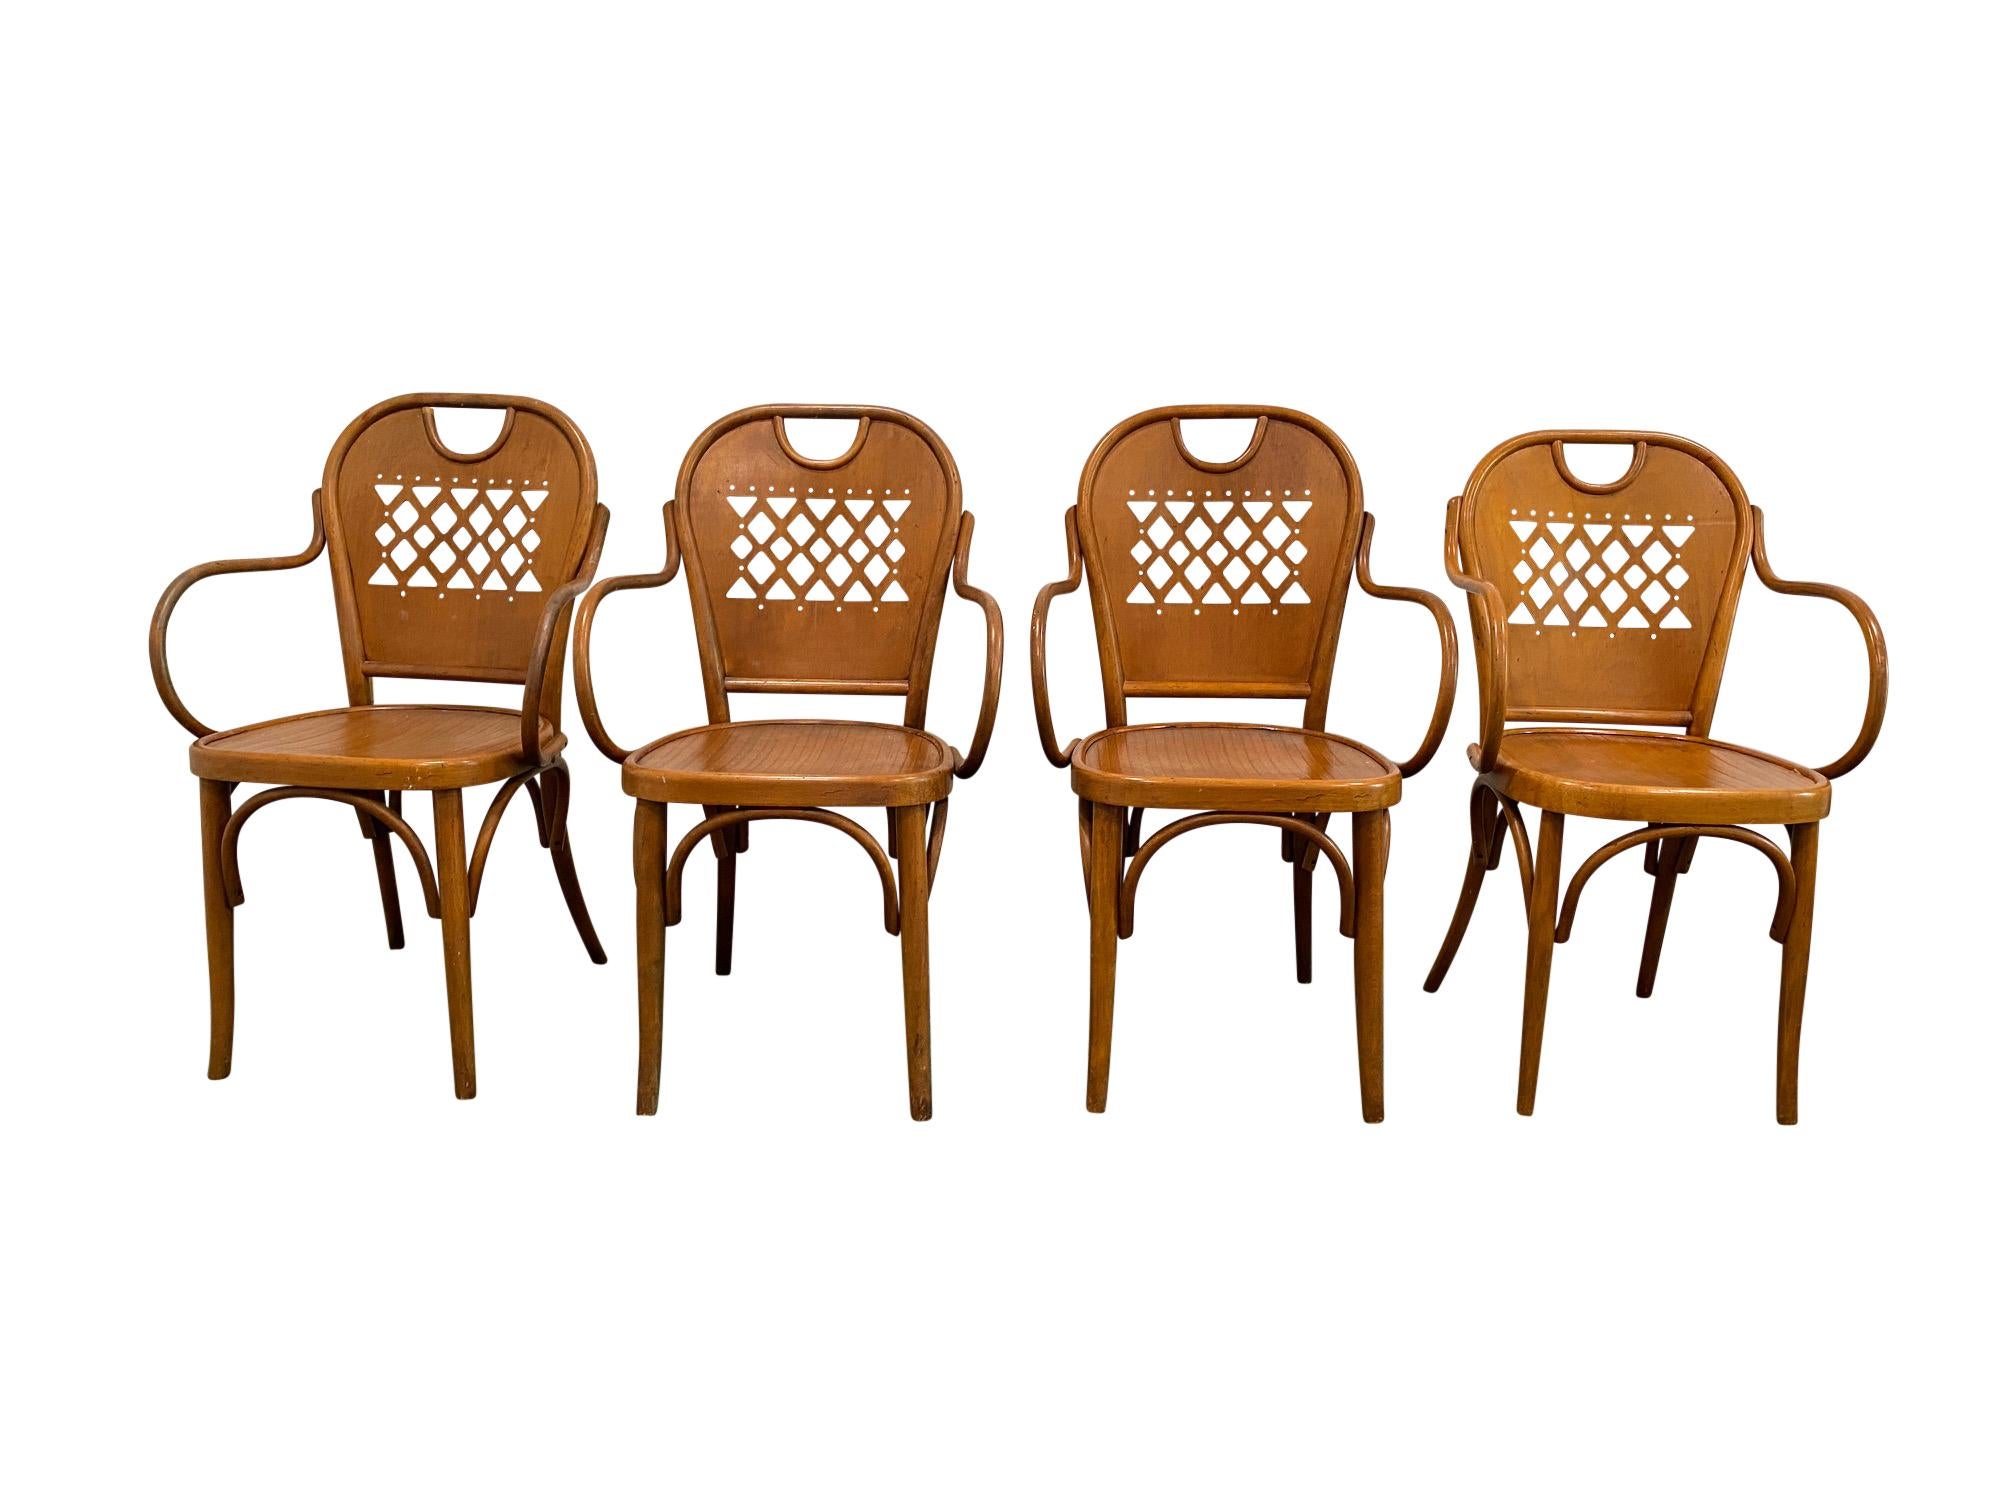 Italian modern bistro dining chairs (set 4), wood. Made in 1940s. Thonet style.